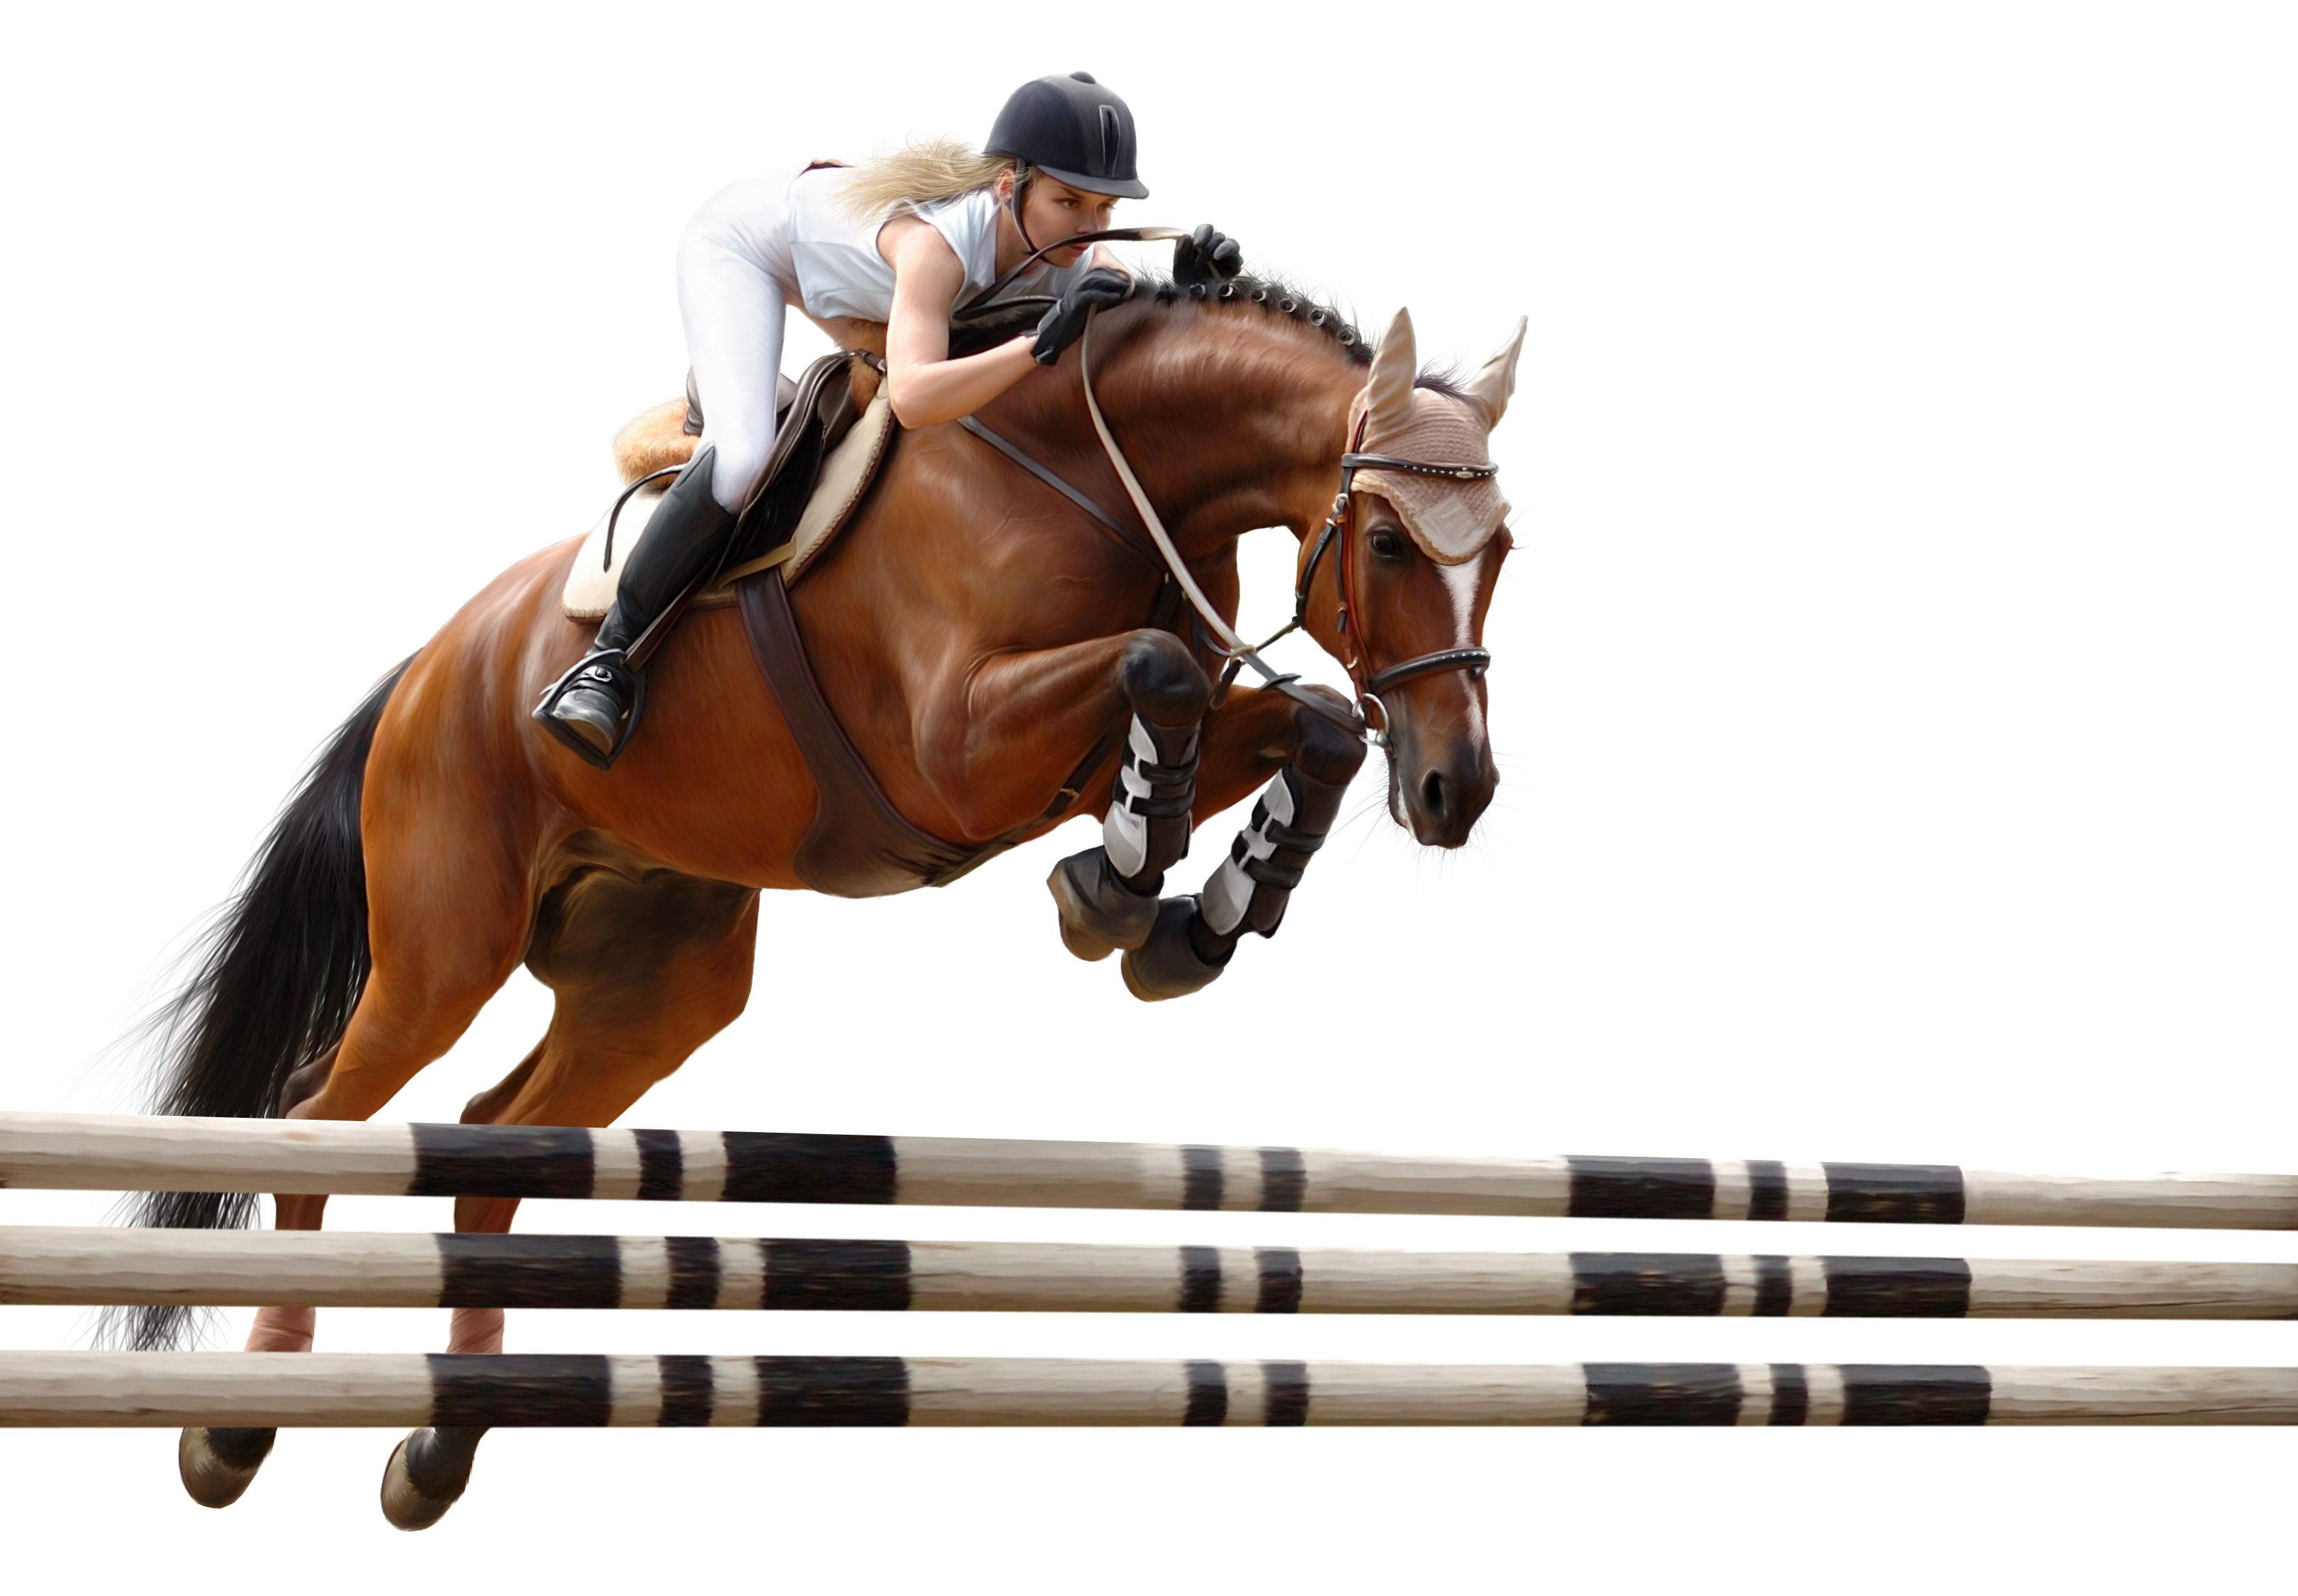 Sports Show Jumping 3532x2453